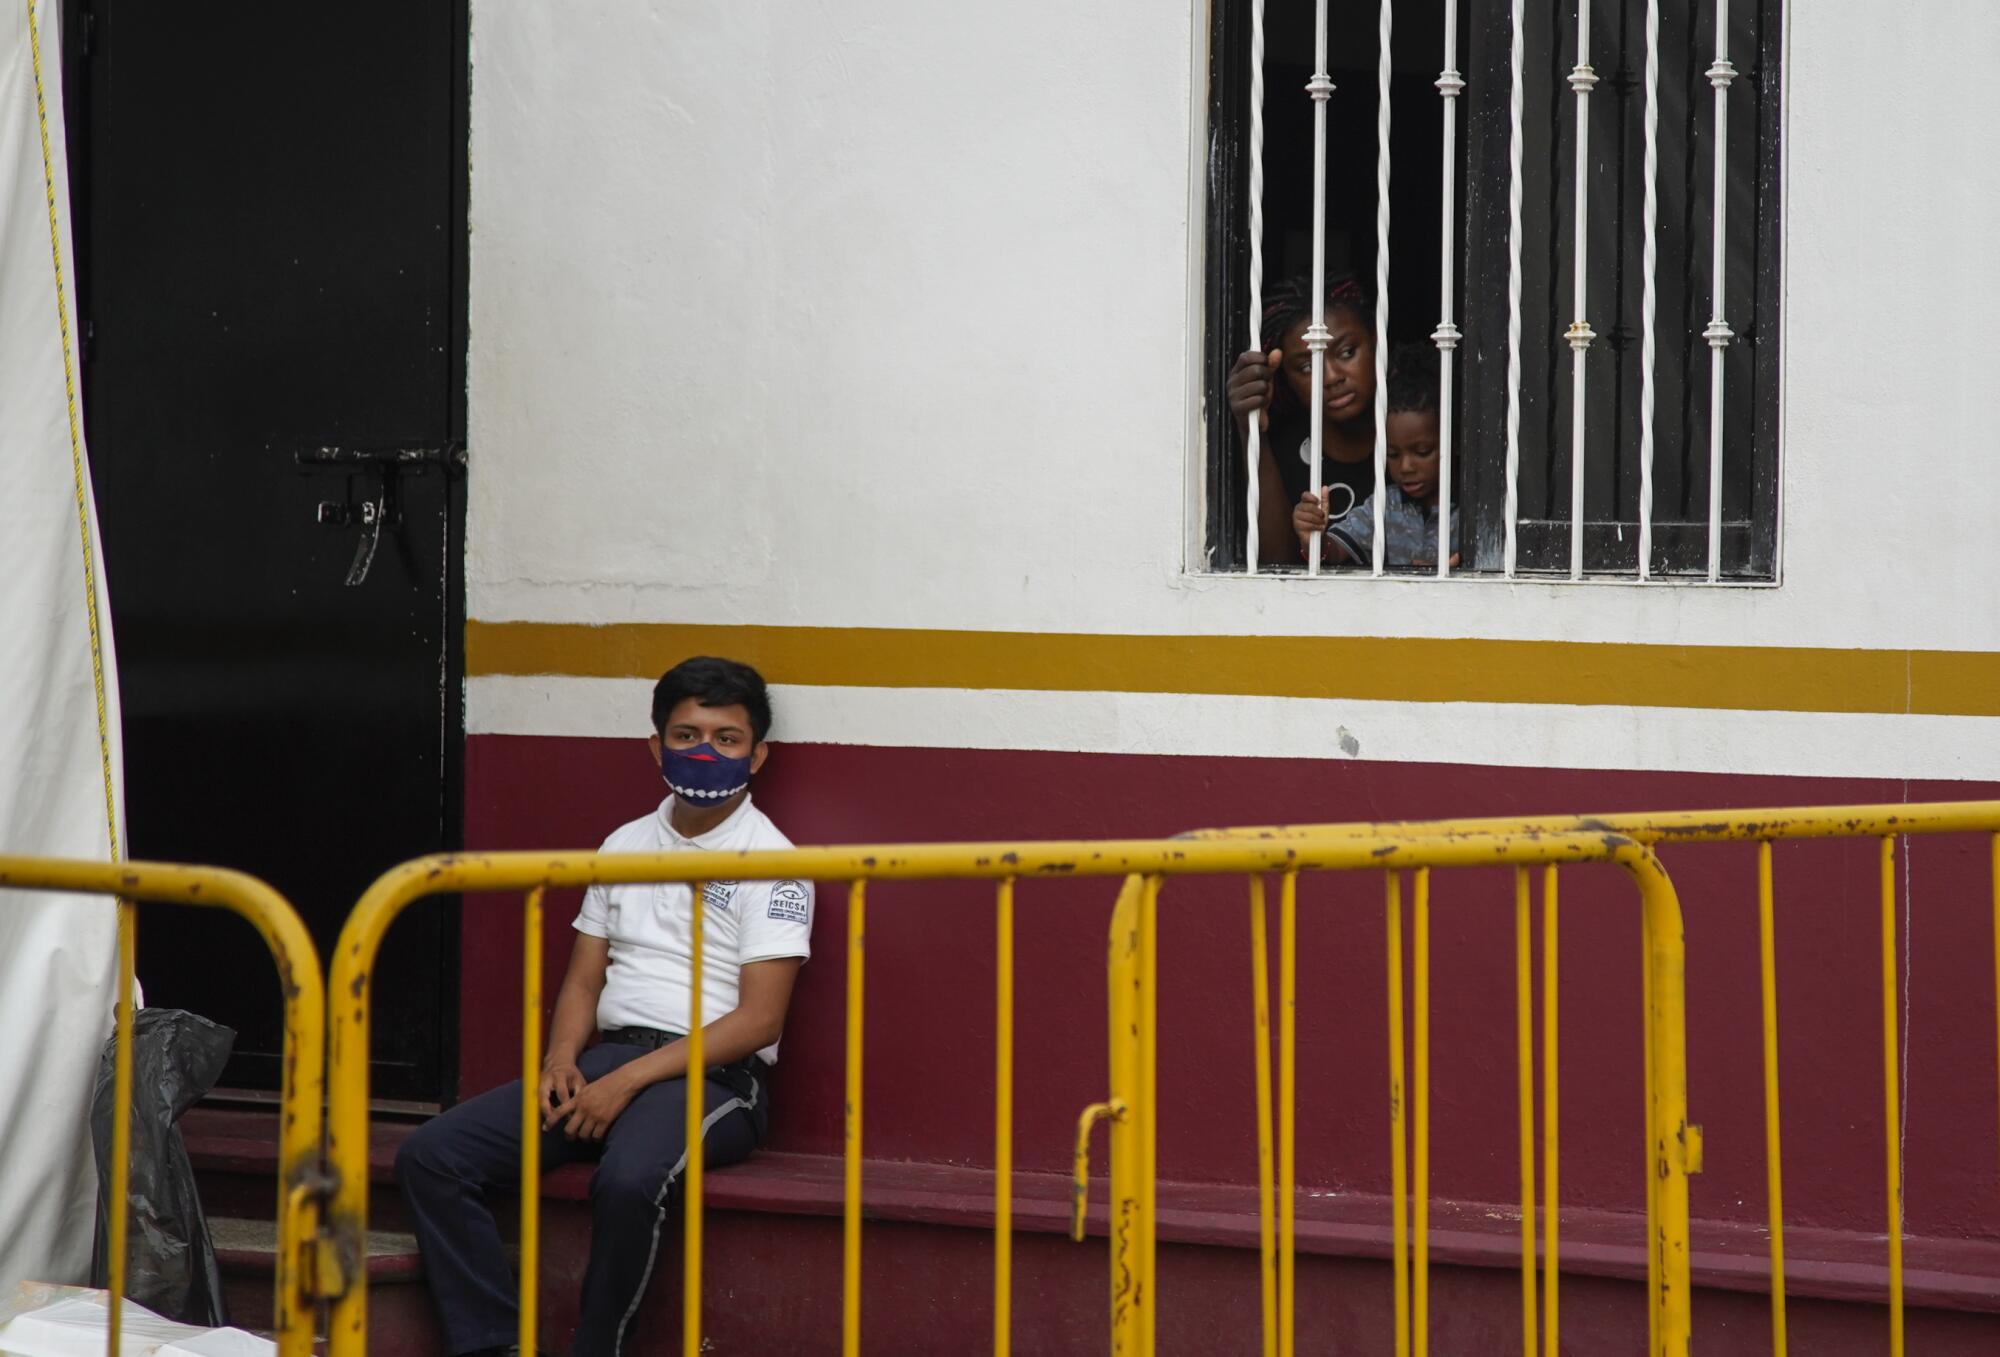 A woman and child in Mexican immigration custody look out a window of a detention center